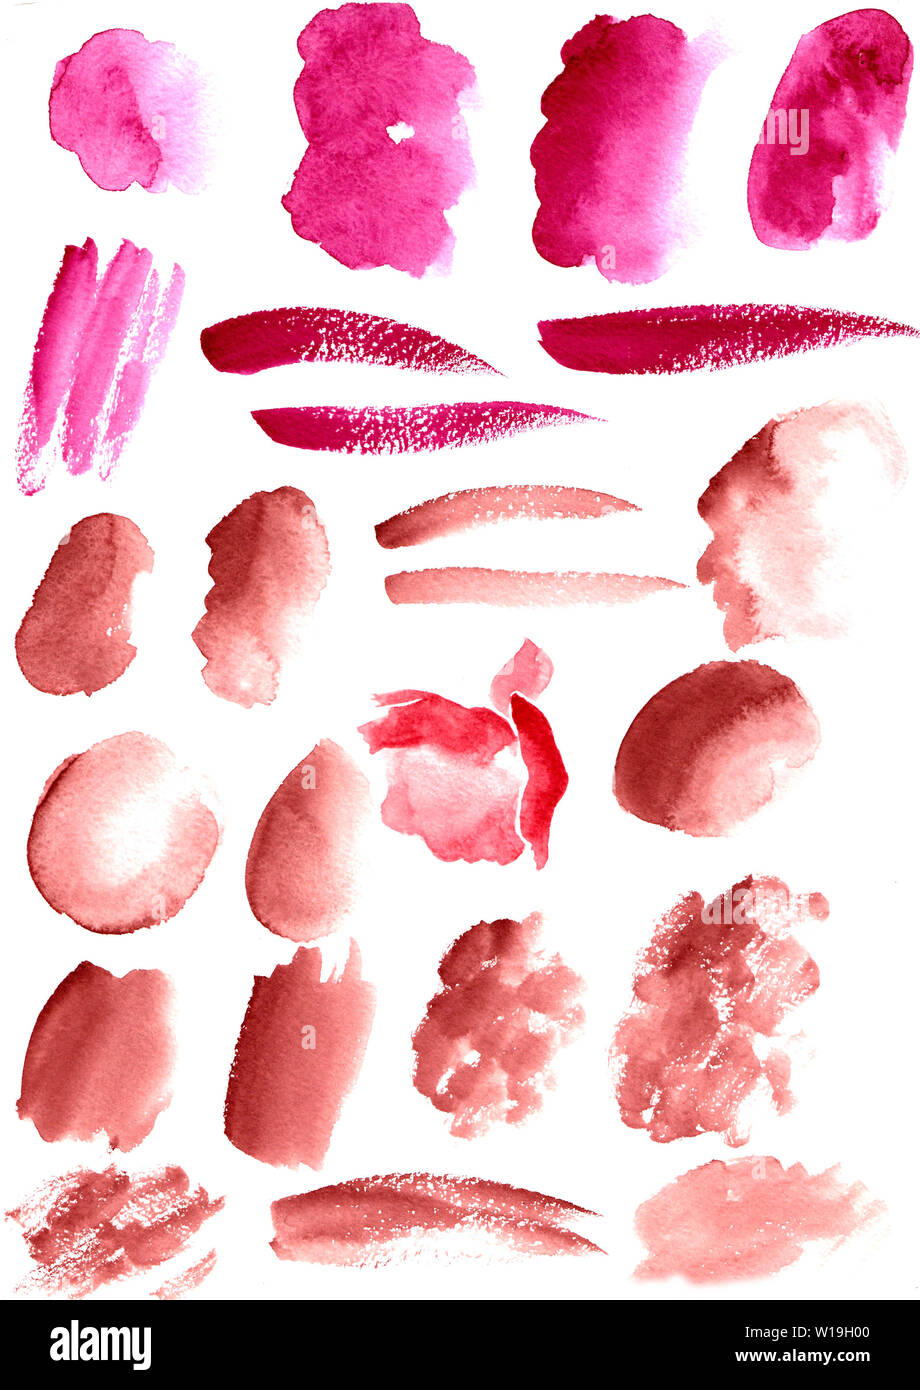 A set of watercolor brush strokes of pink and brown color on texture paper. Stock Photo